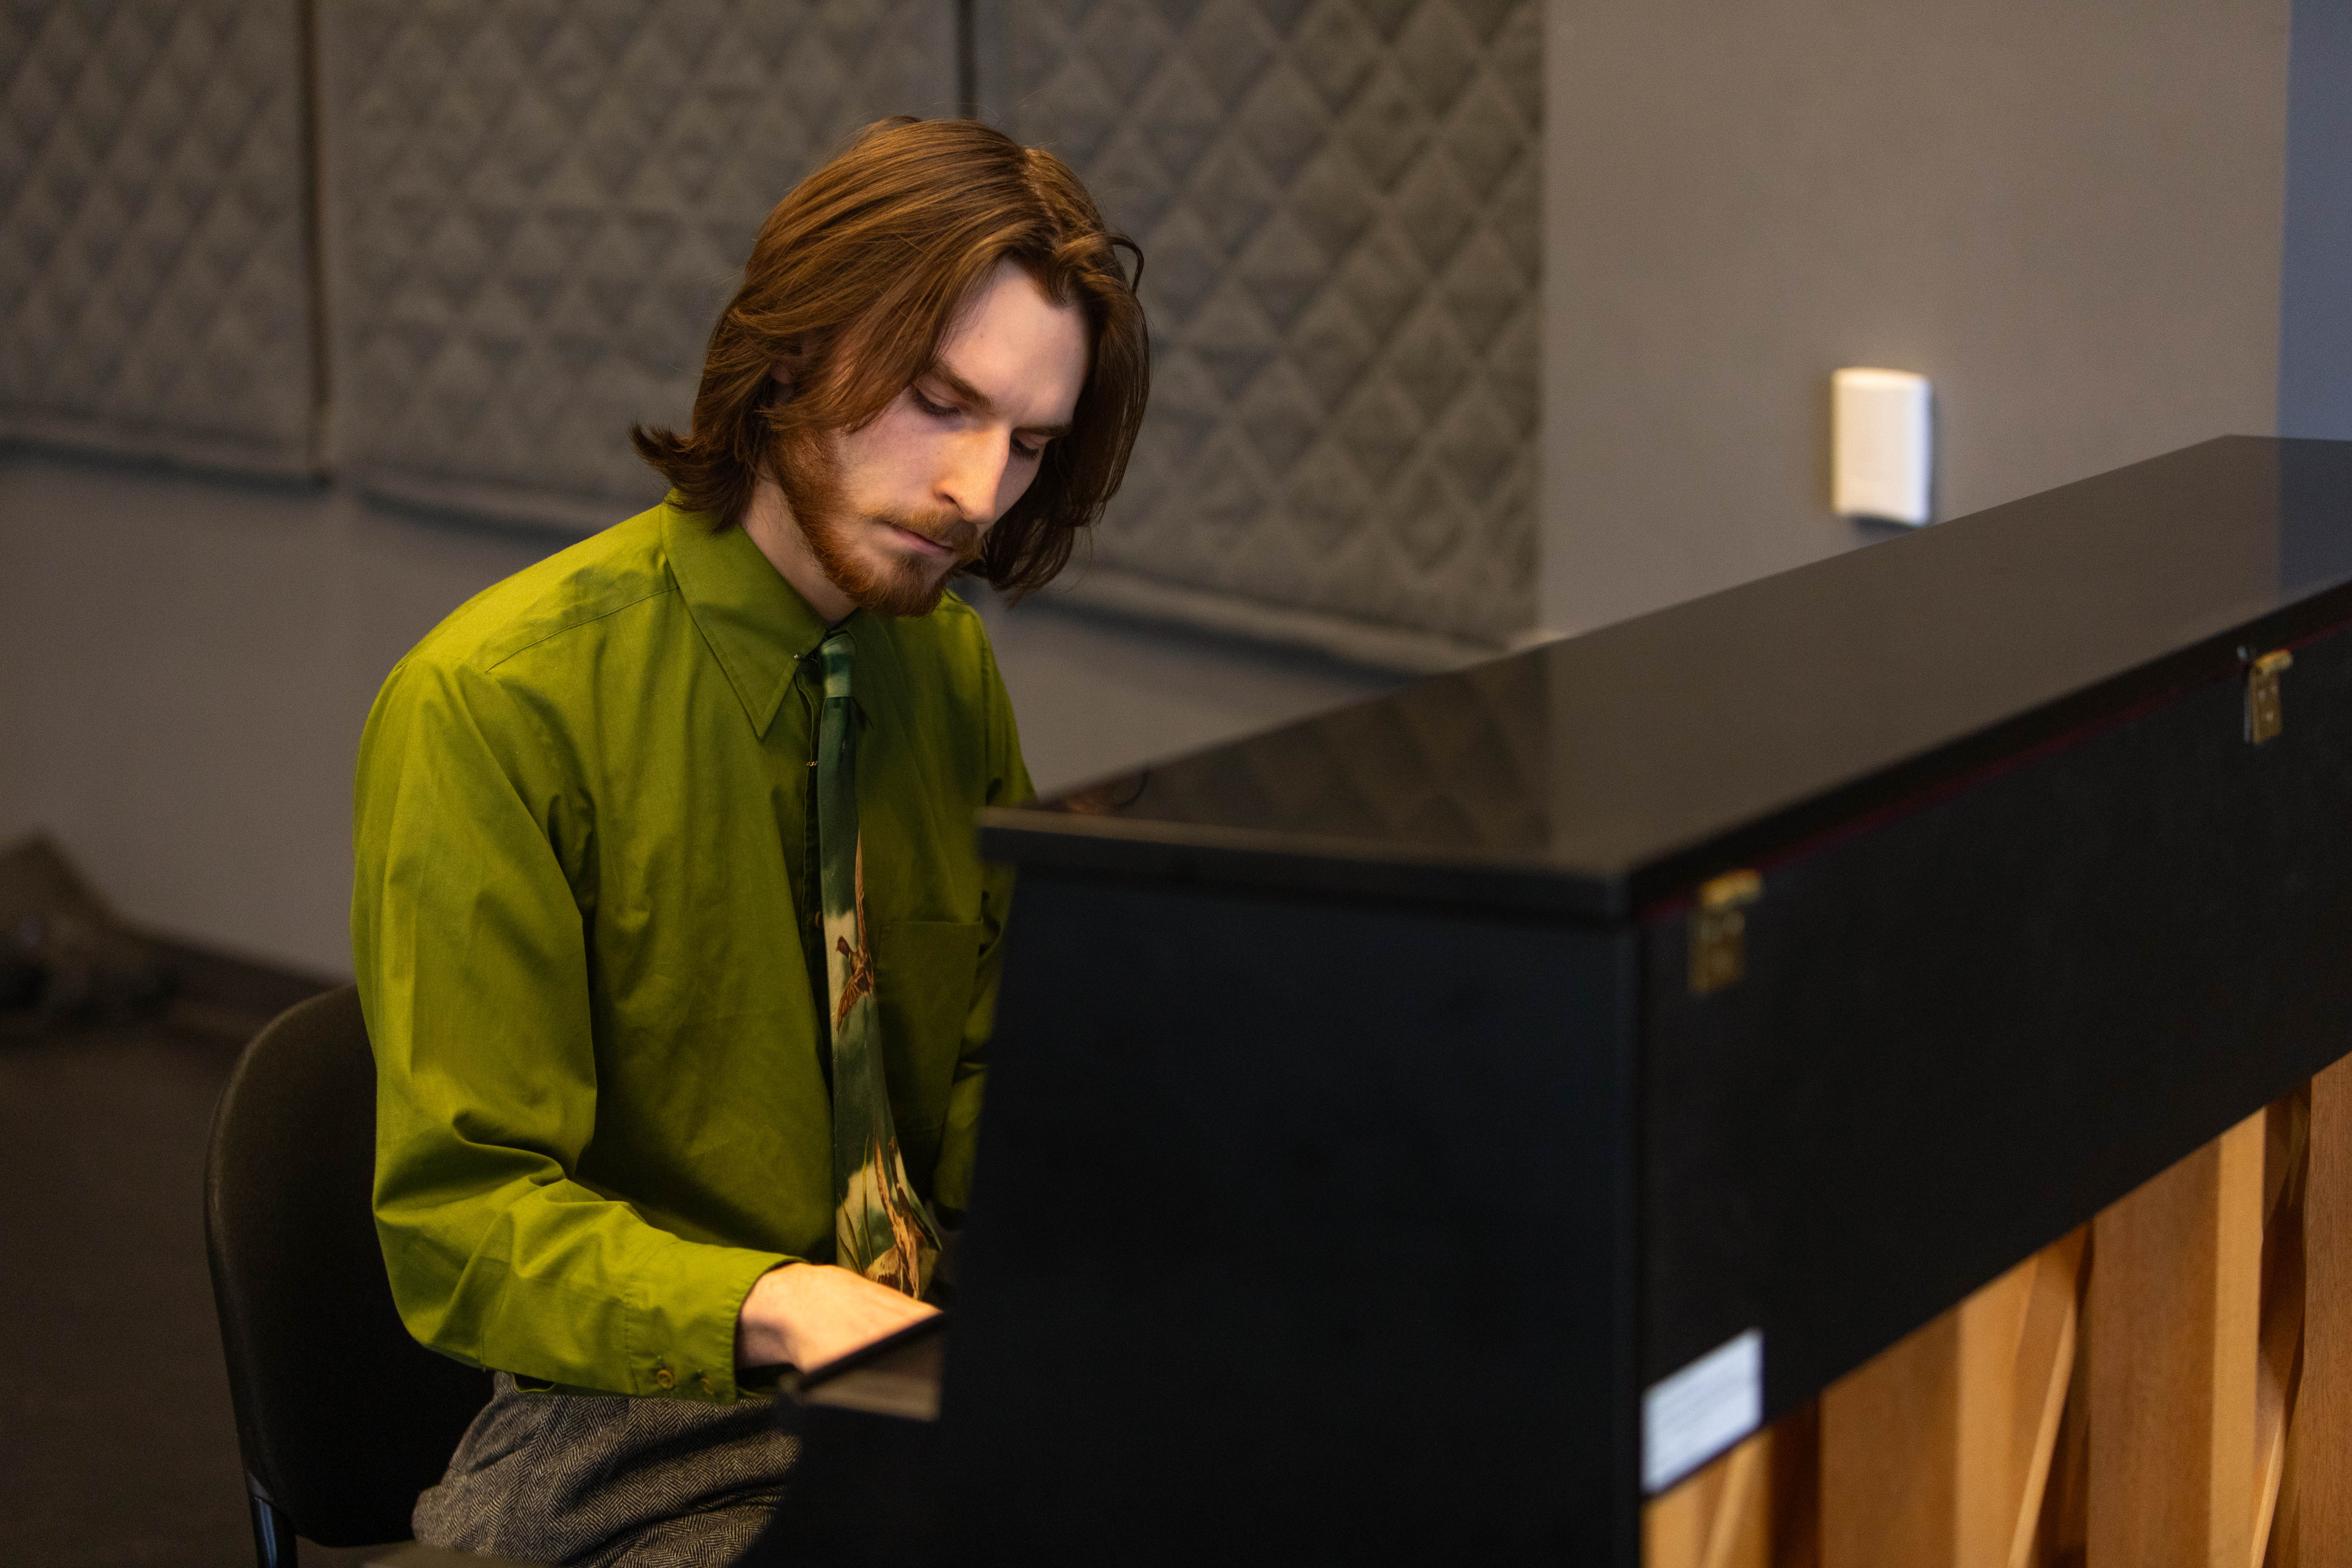 Student Ethan Korvne plays the piano